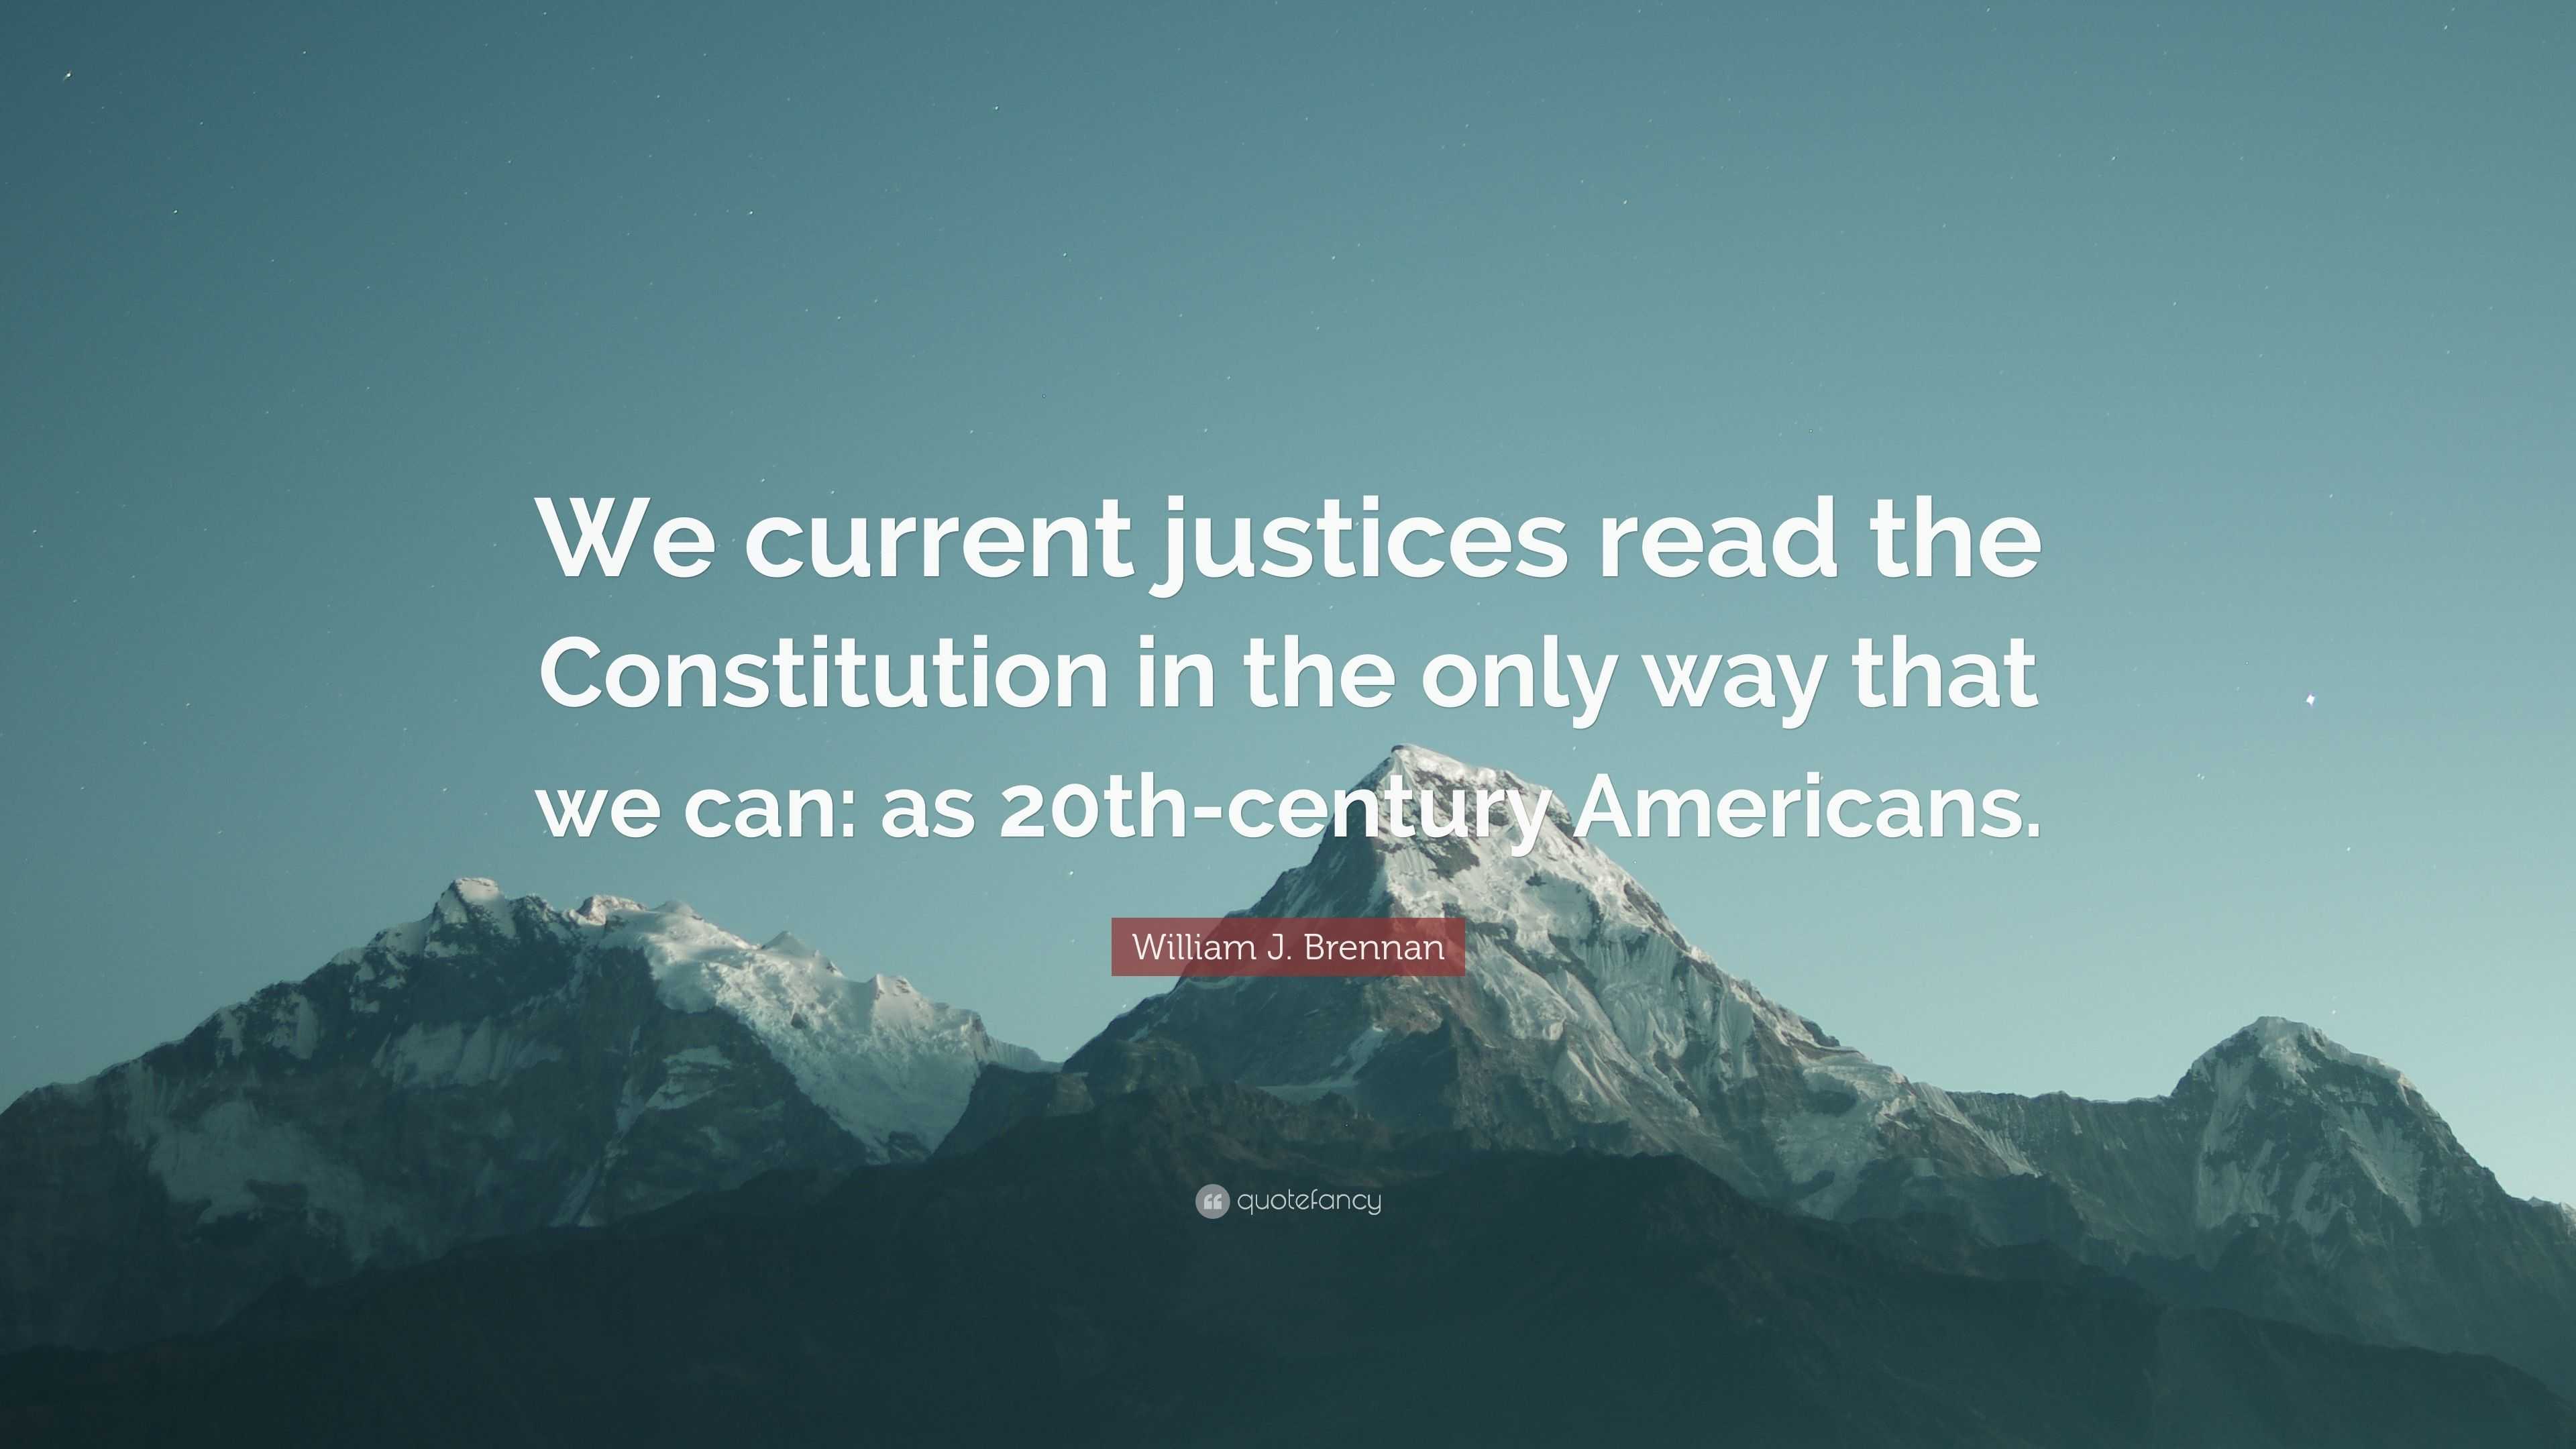 William J Brennan Quote “we Current Justices Read The Constitution In The Only Way That We Can 2678